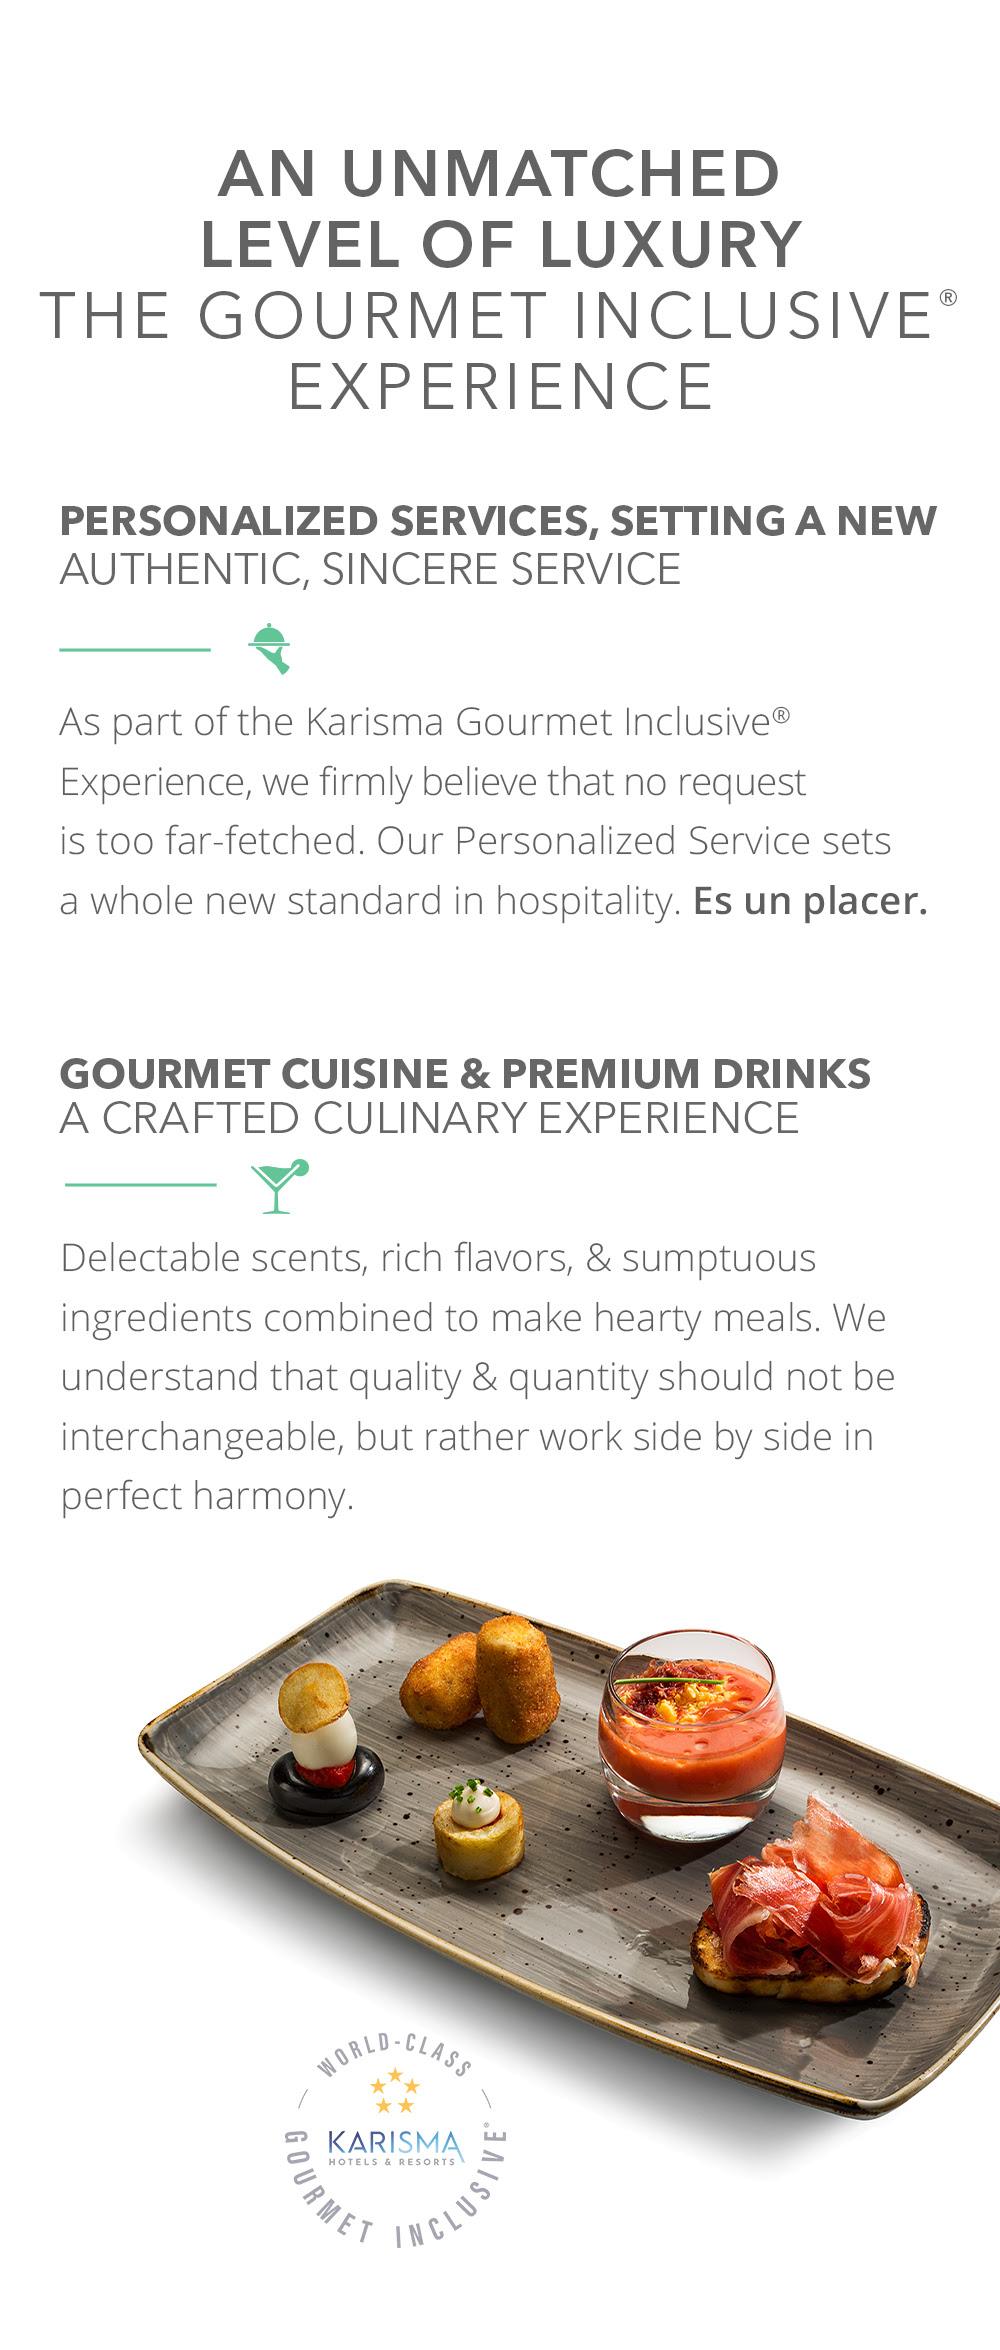 An Unmatched Level of Luxury The Gourmet Inclusive® Experience